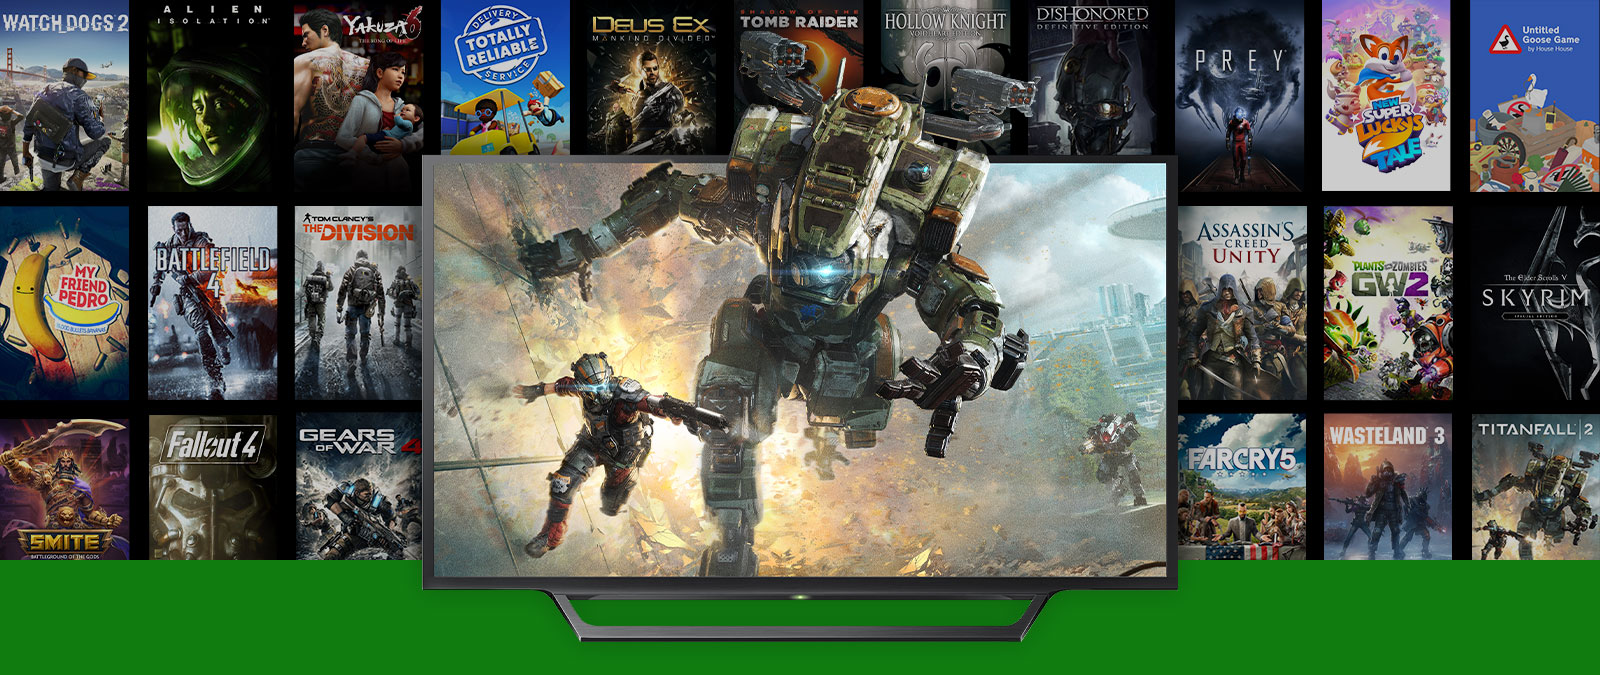 Titanfall 2 characters leap out of a tv with multiple box shots of backward compatible games FPS boosted games in the background